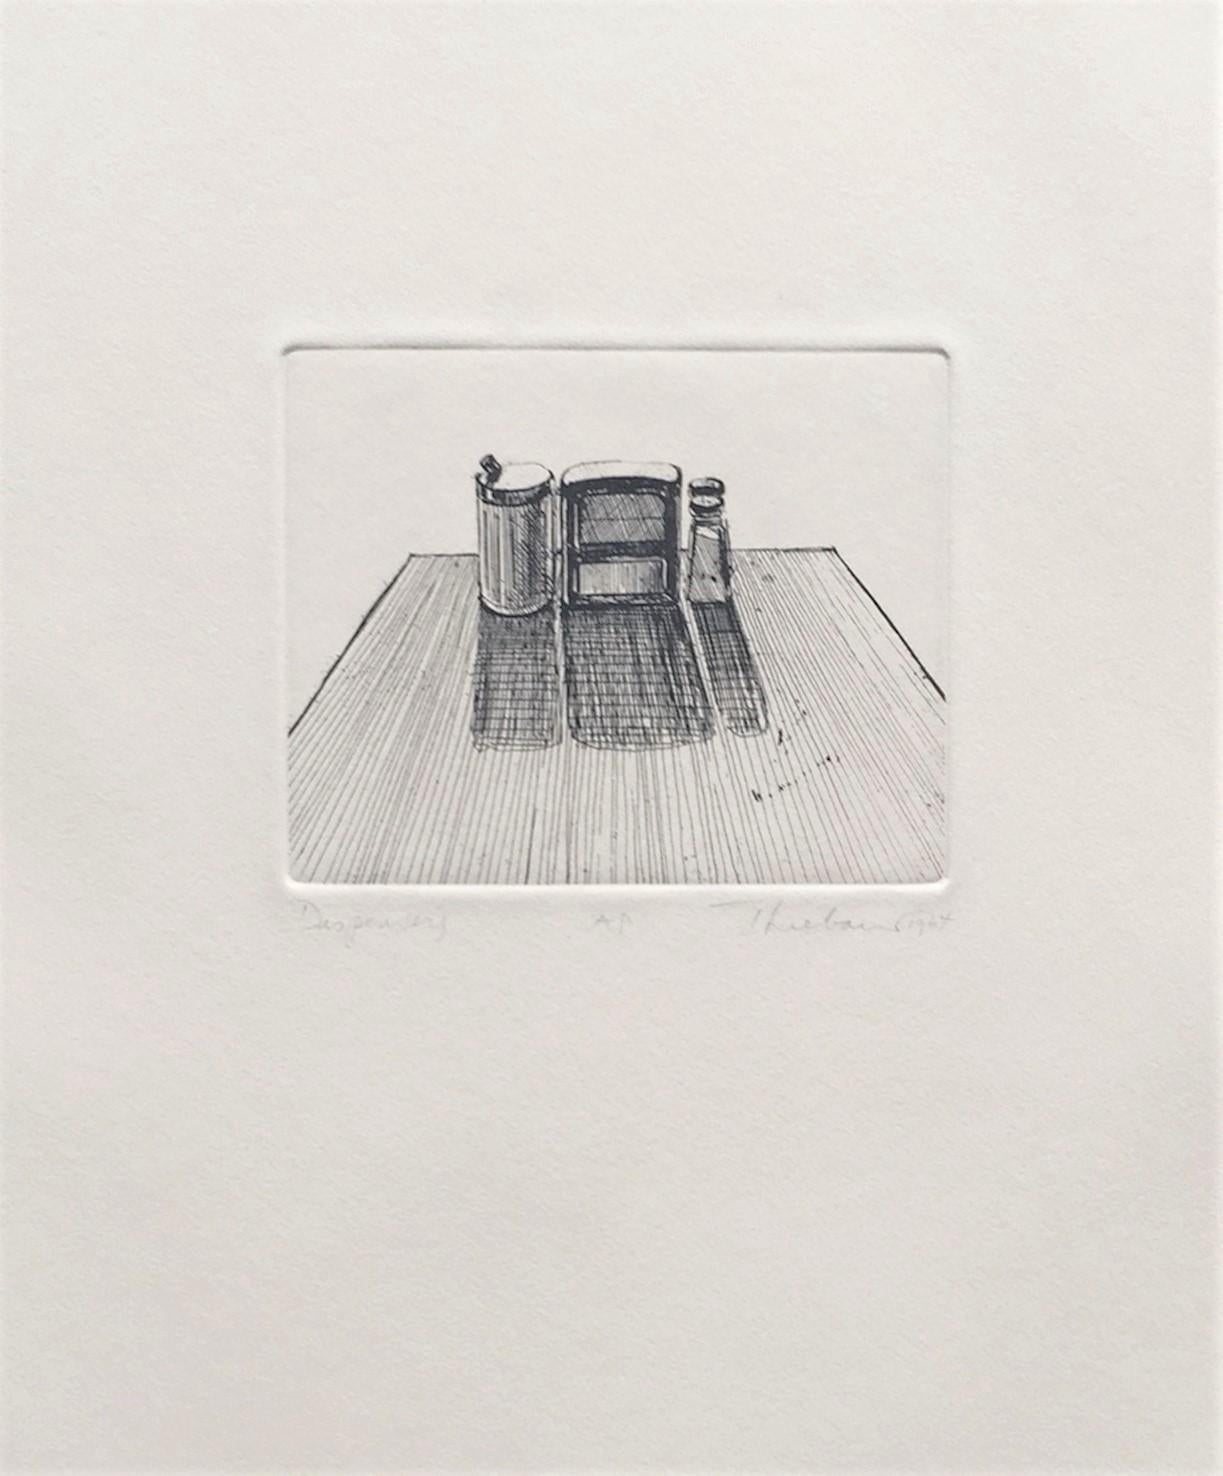 Created in 1964 as part of the Delights portfolio, Café Table (Dispensers), by Wayne Thiebaud is an original etching on BFK Rives paper.  Signed, titled and dated in pencil, the artwork is annotated “AP” (as an artist proof) outside of the edition